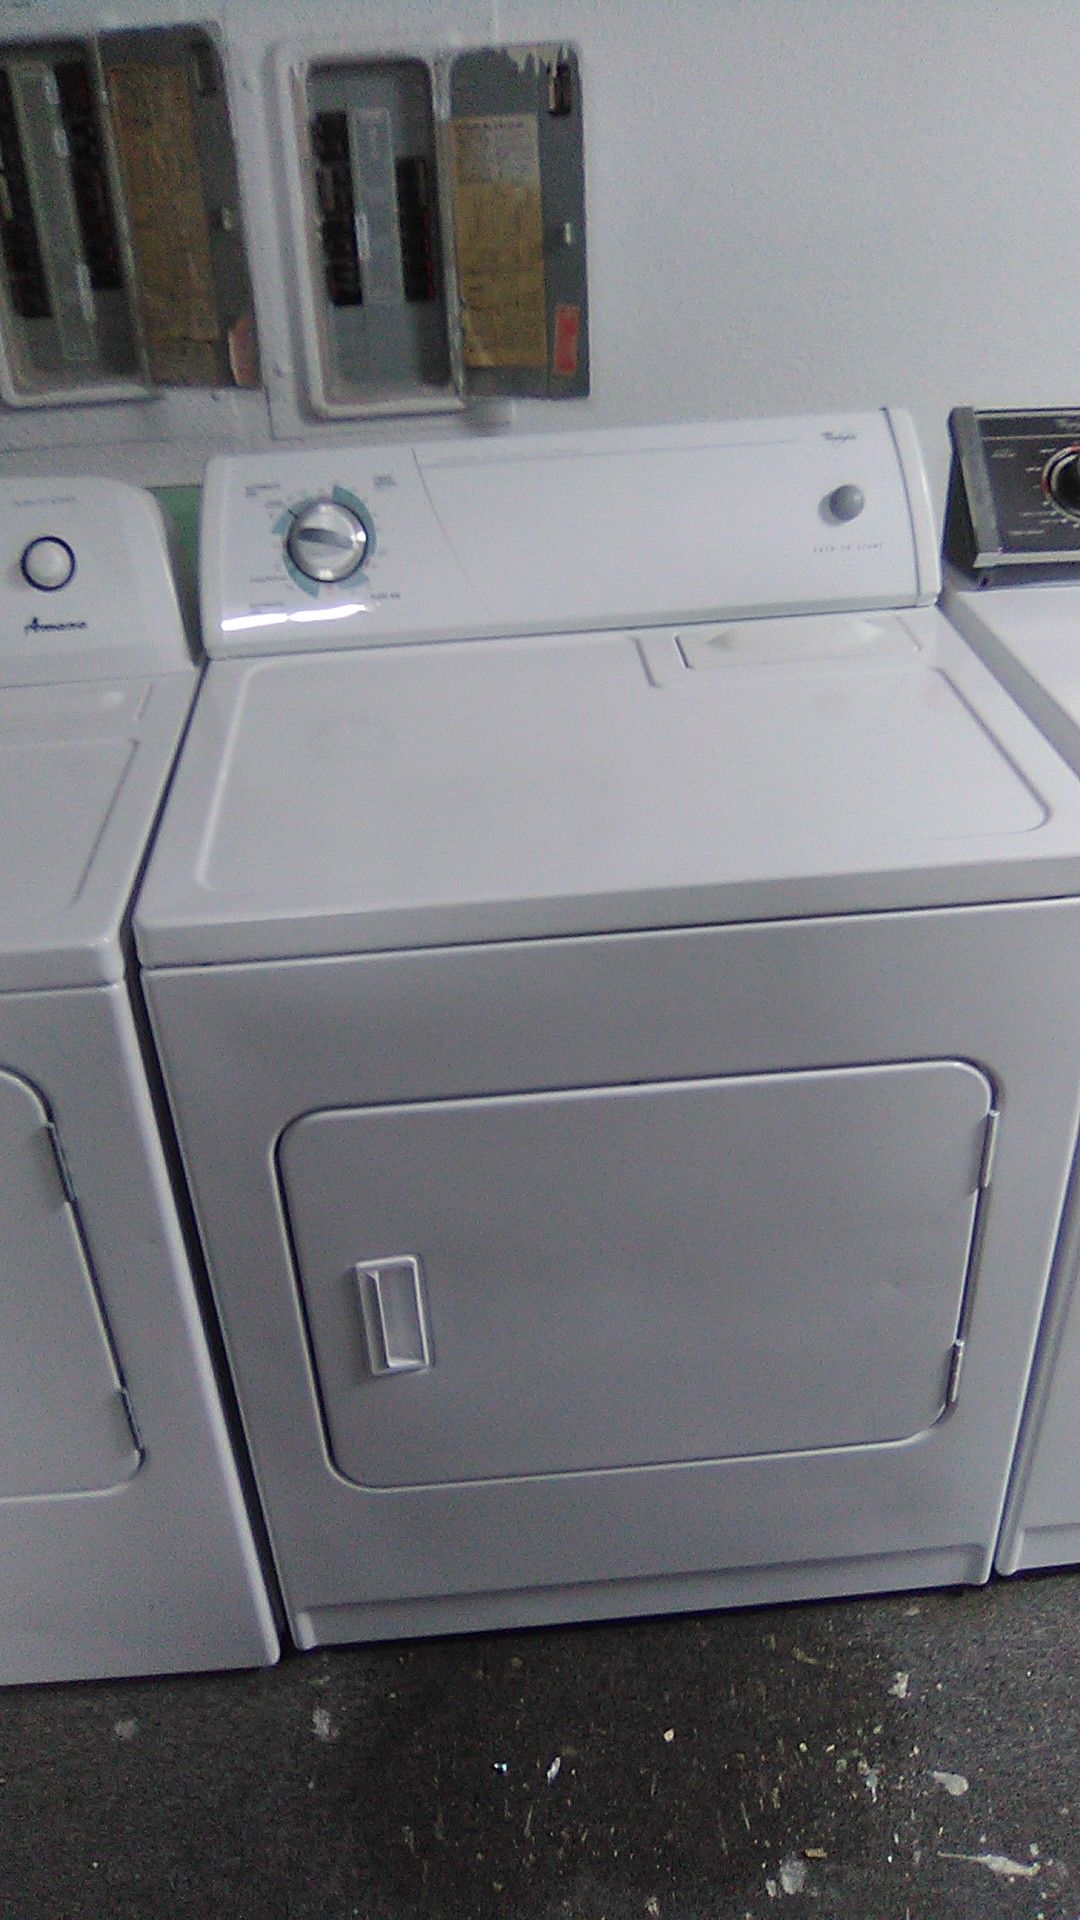 Whirlpool commercial quality extra large capacity dryer